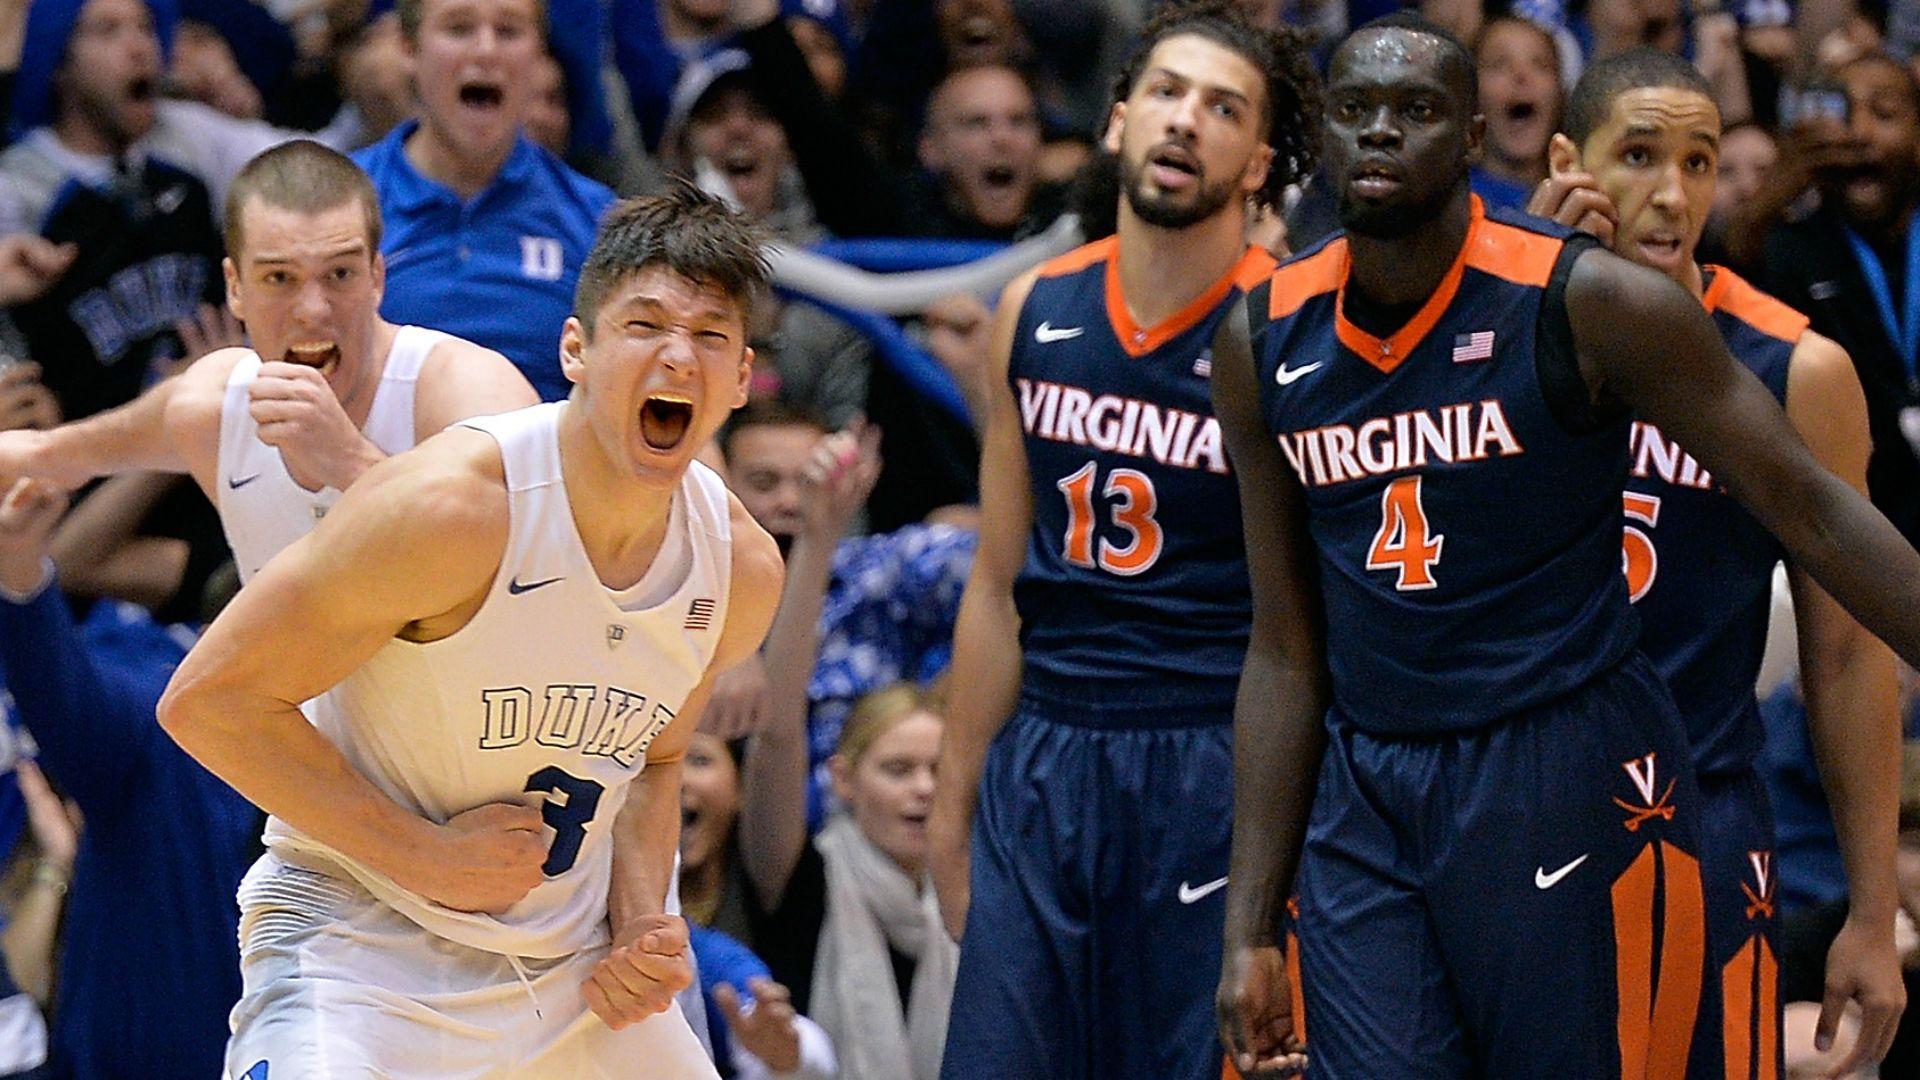 Grayson Allen is staying at Duke to become the most hated Blue Devil